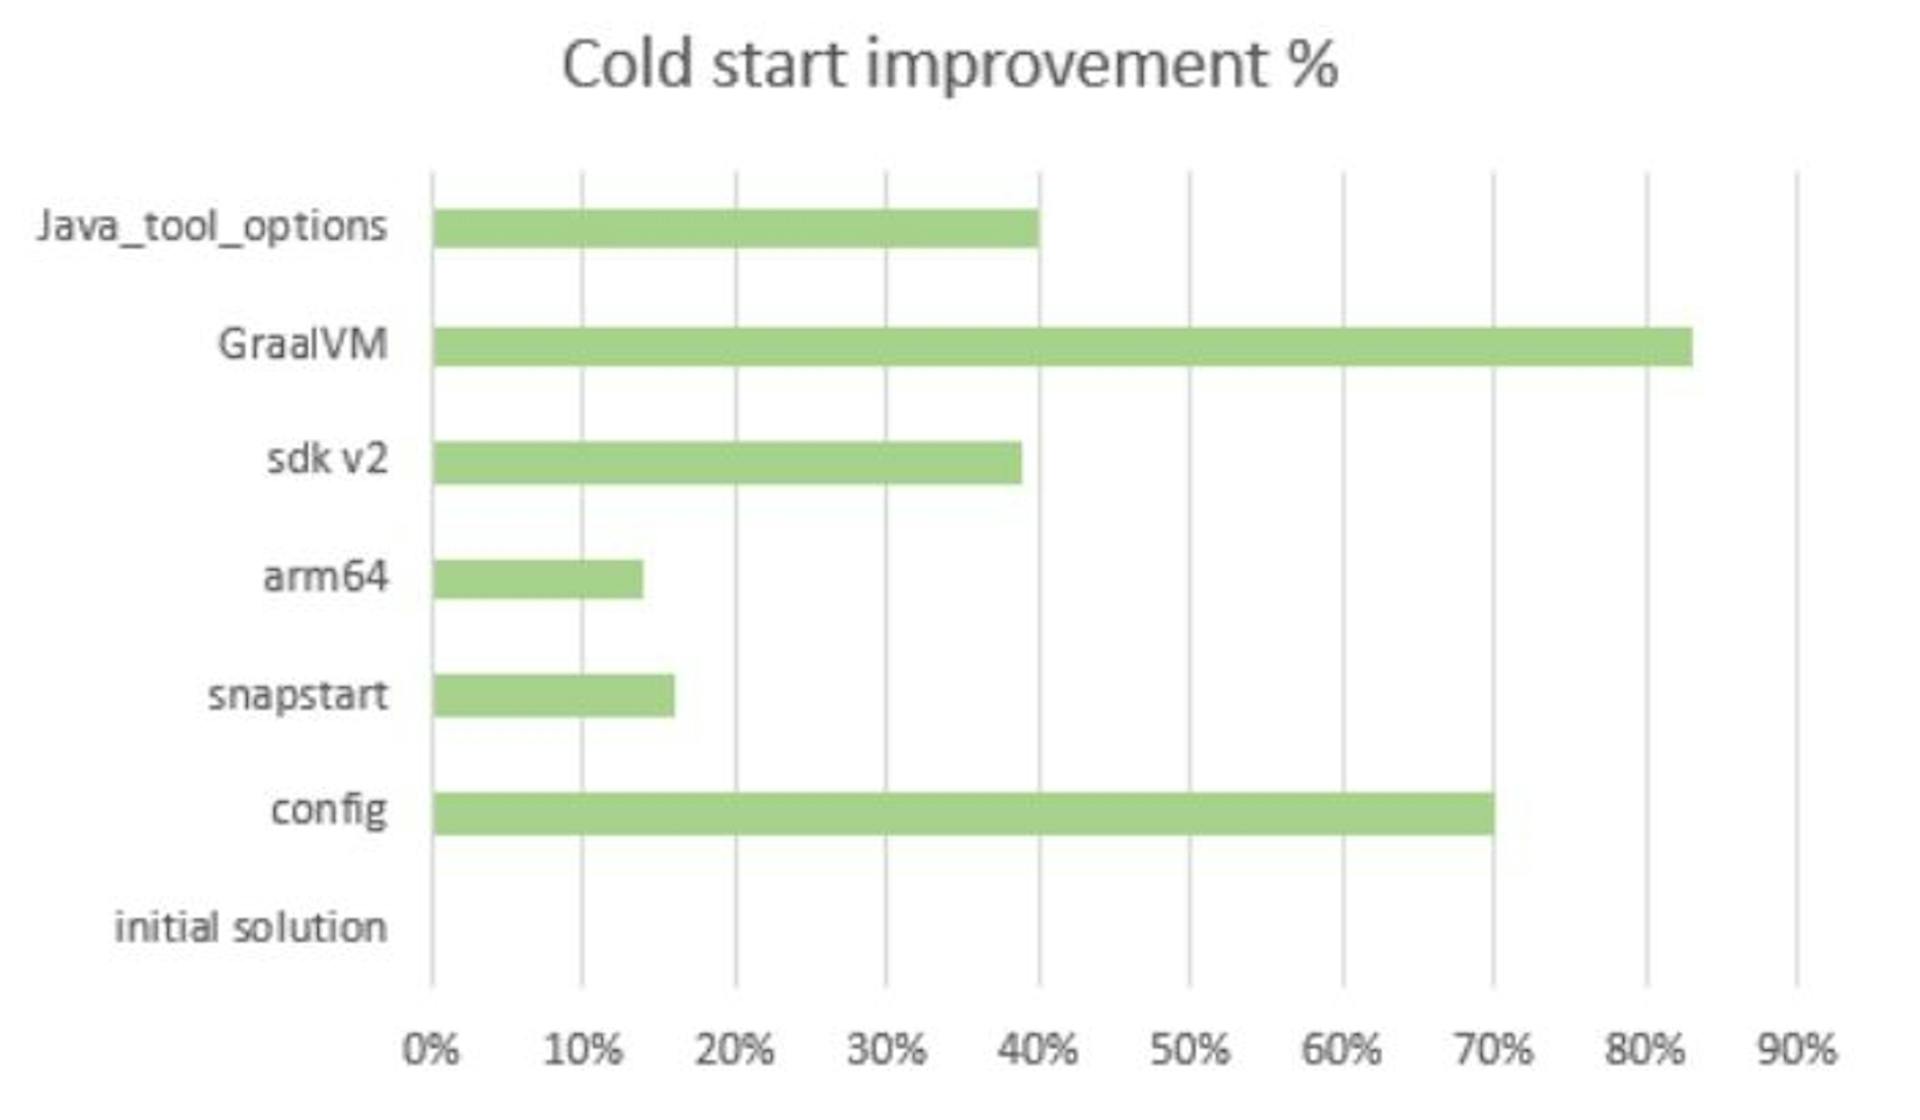 Fig. 4. Cold start enhancement by approach %